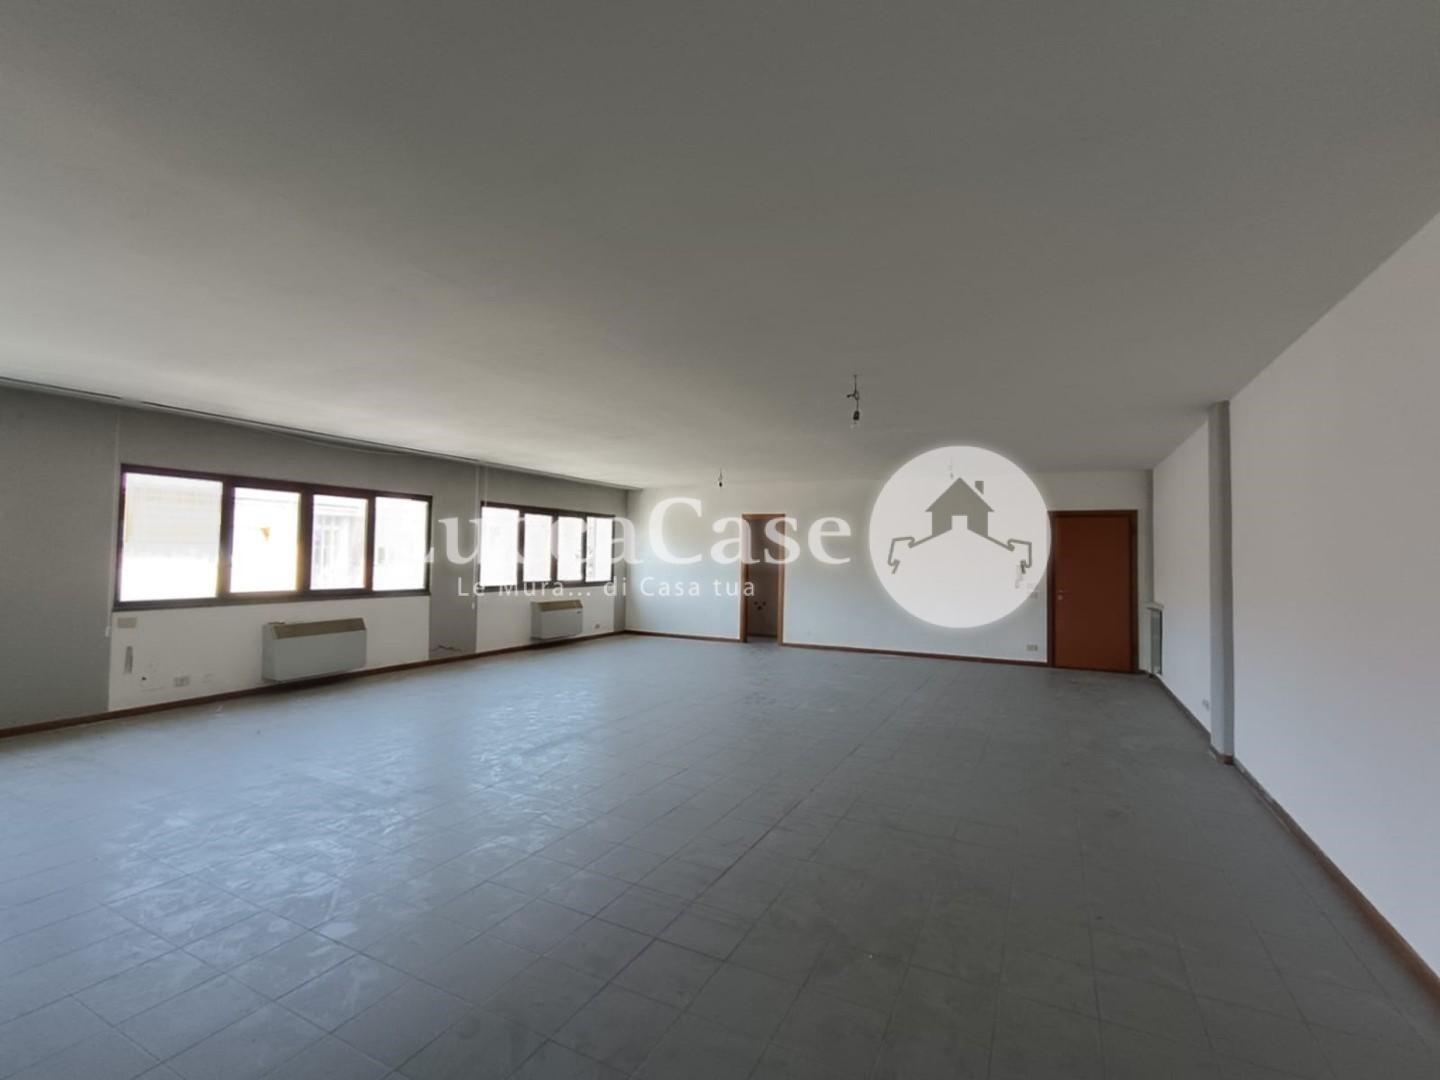 Office for commercial rentals, ref. F007A